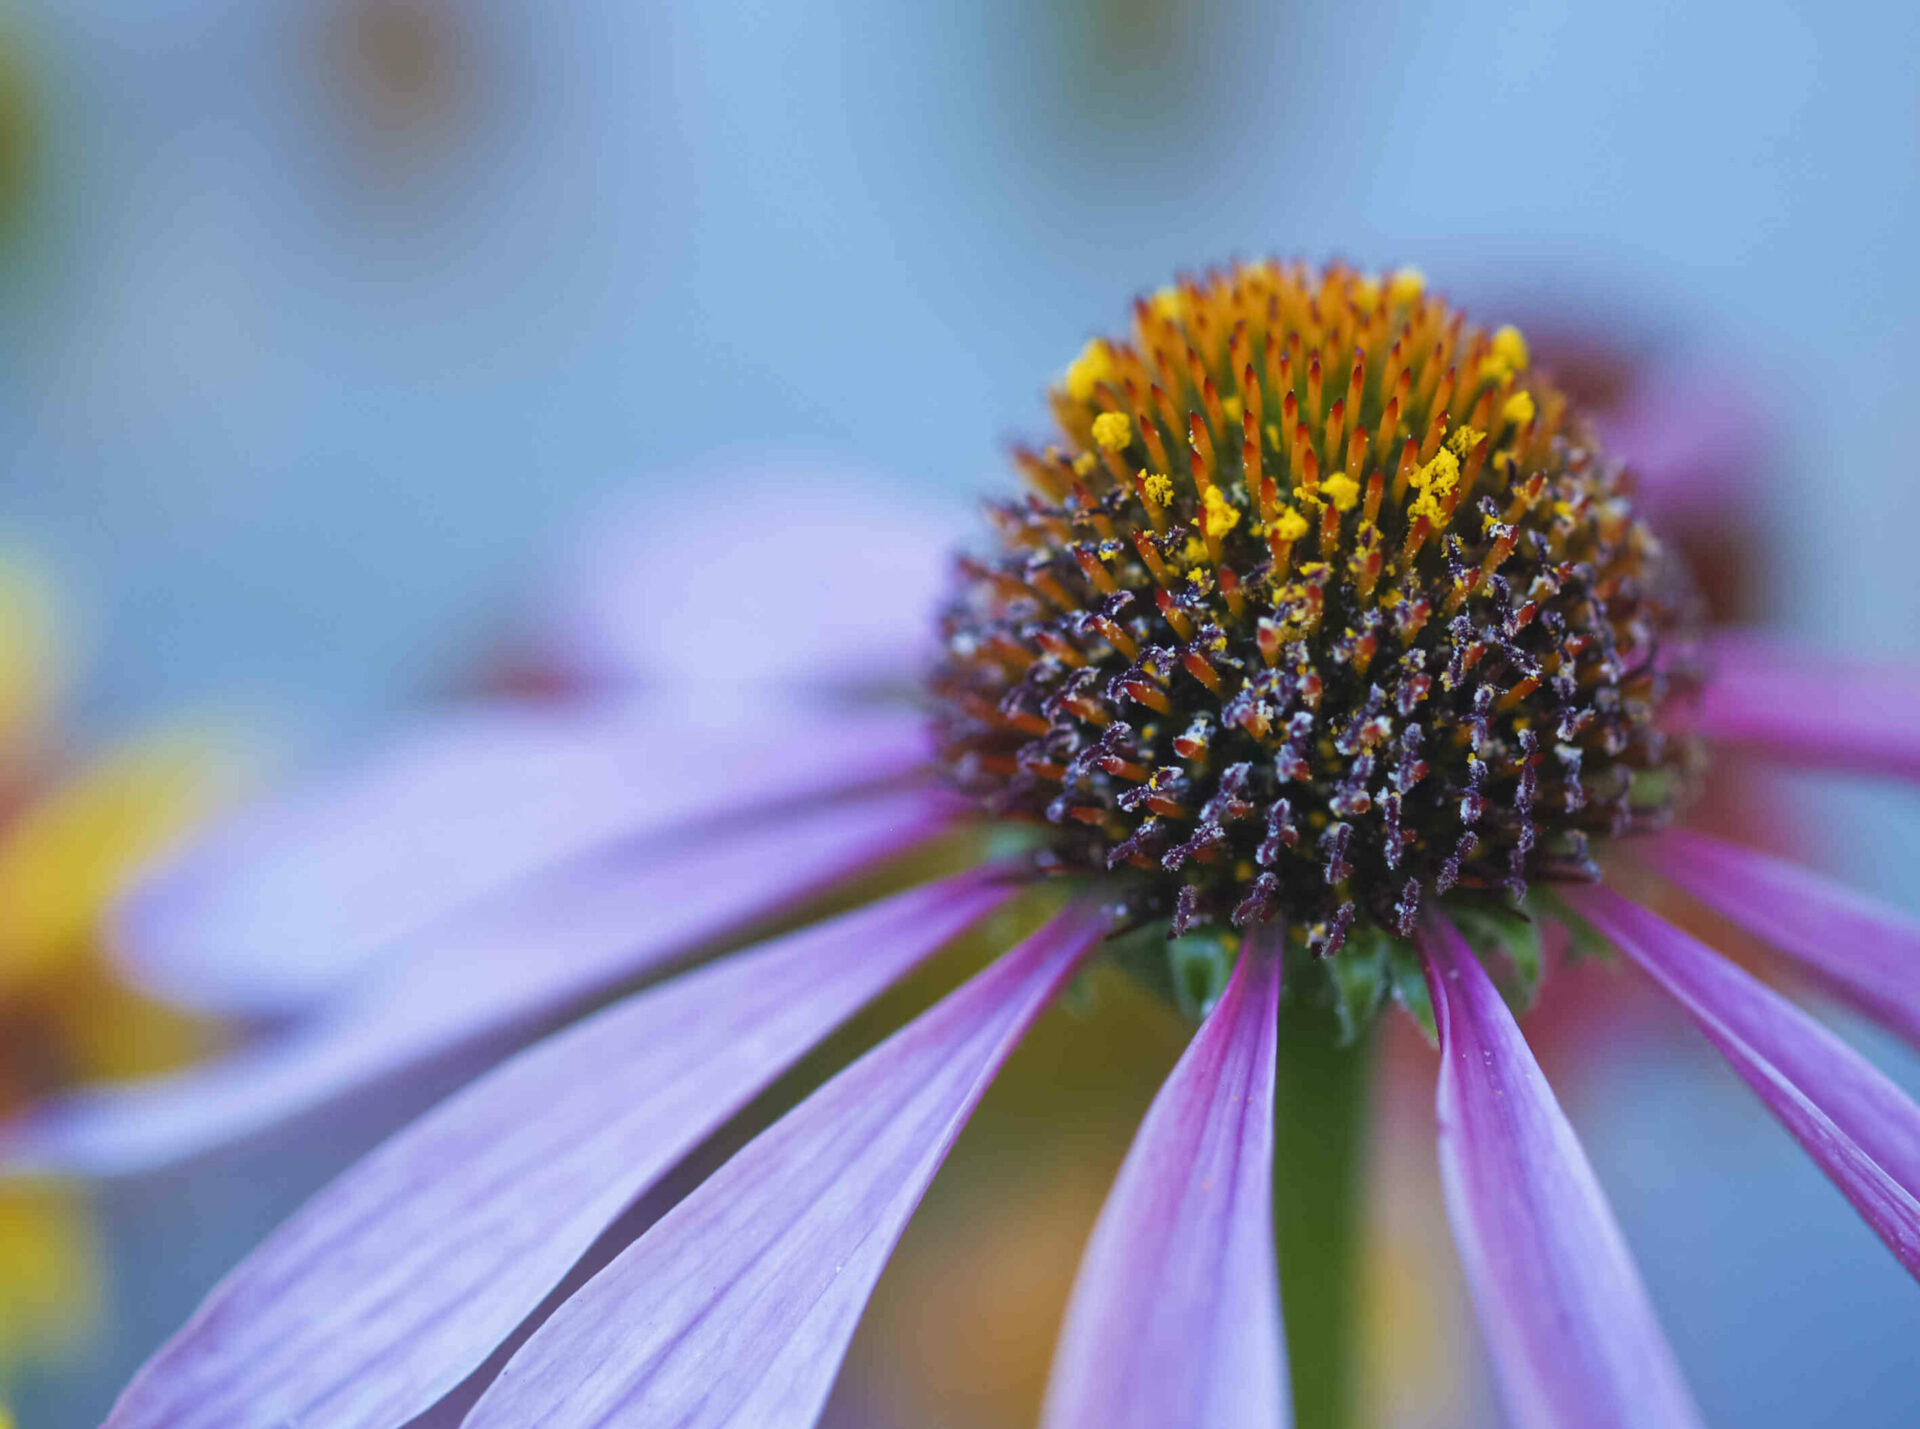 The flower of a coneflower close up